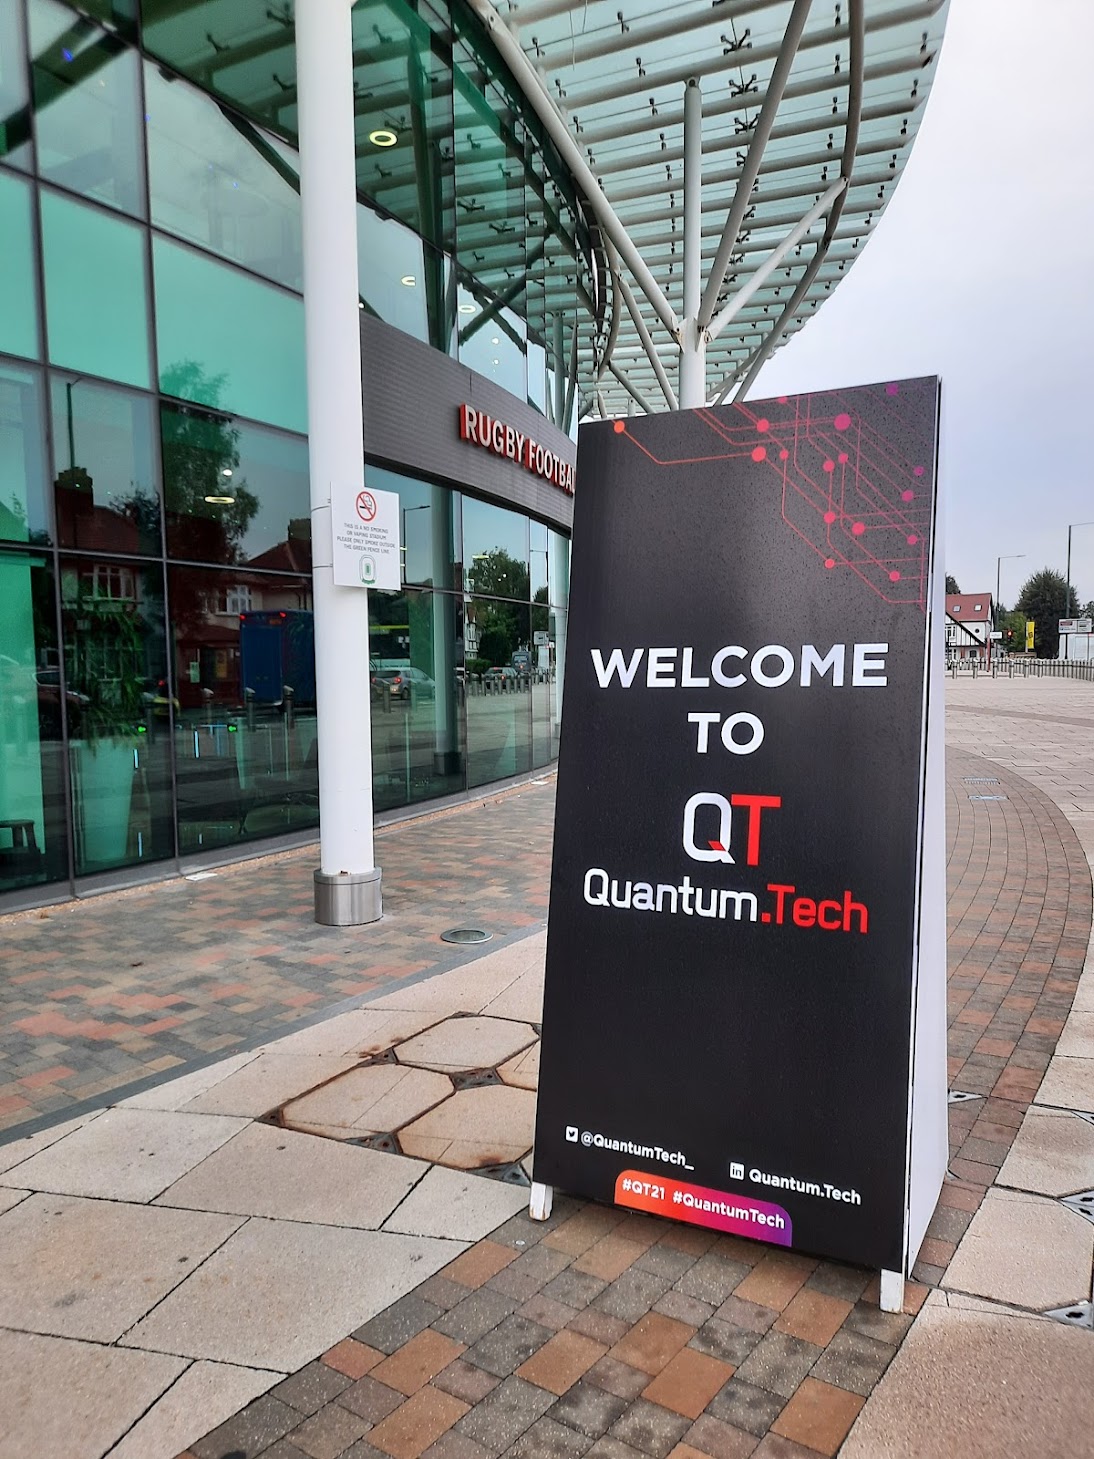 Quantum Technology Comes To The Home Of British Rugby, As Quantum Leaders Conference Aims To Make Britain A Quantum Superpower